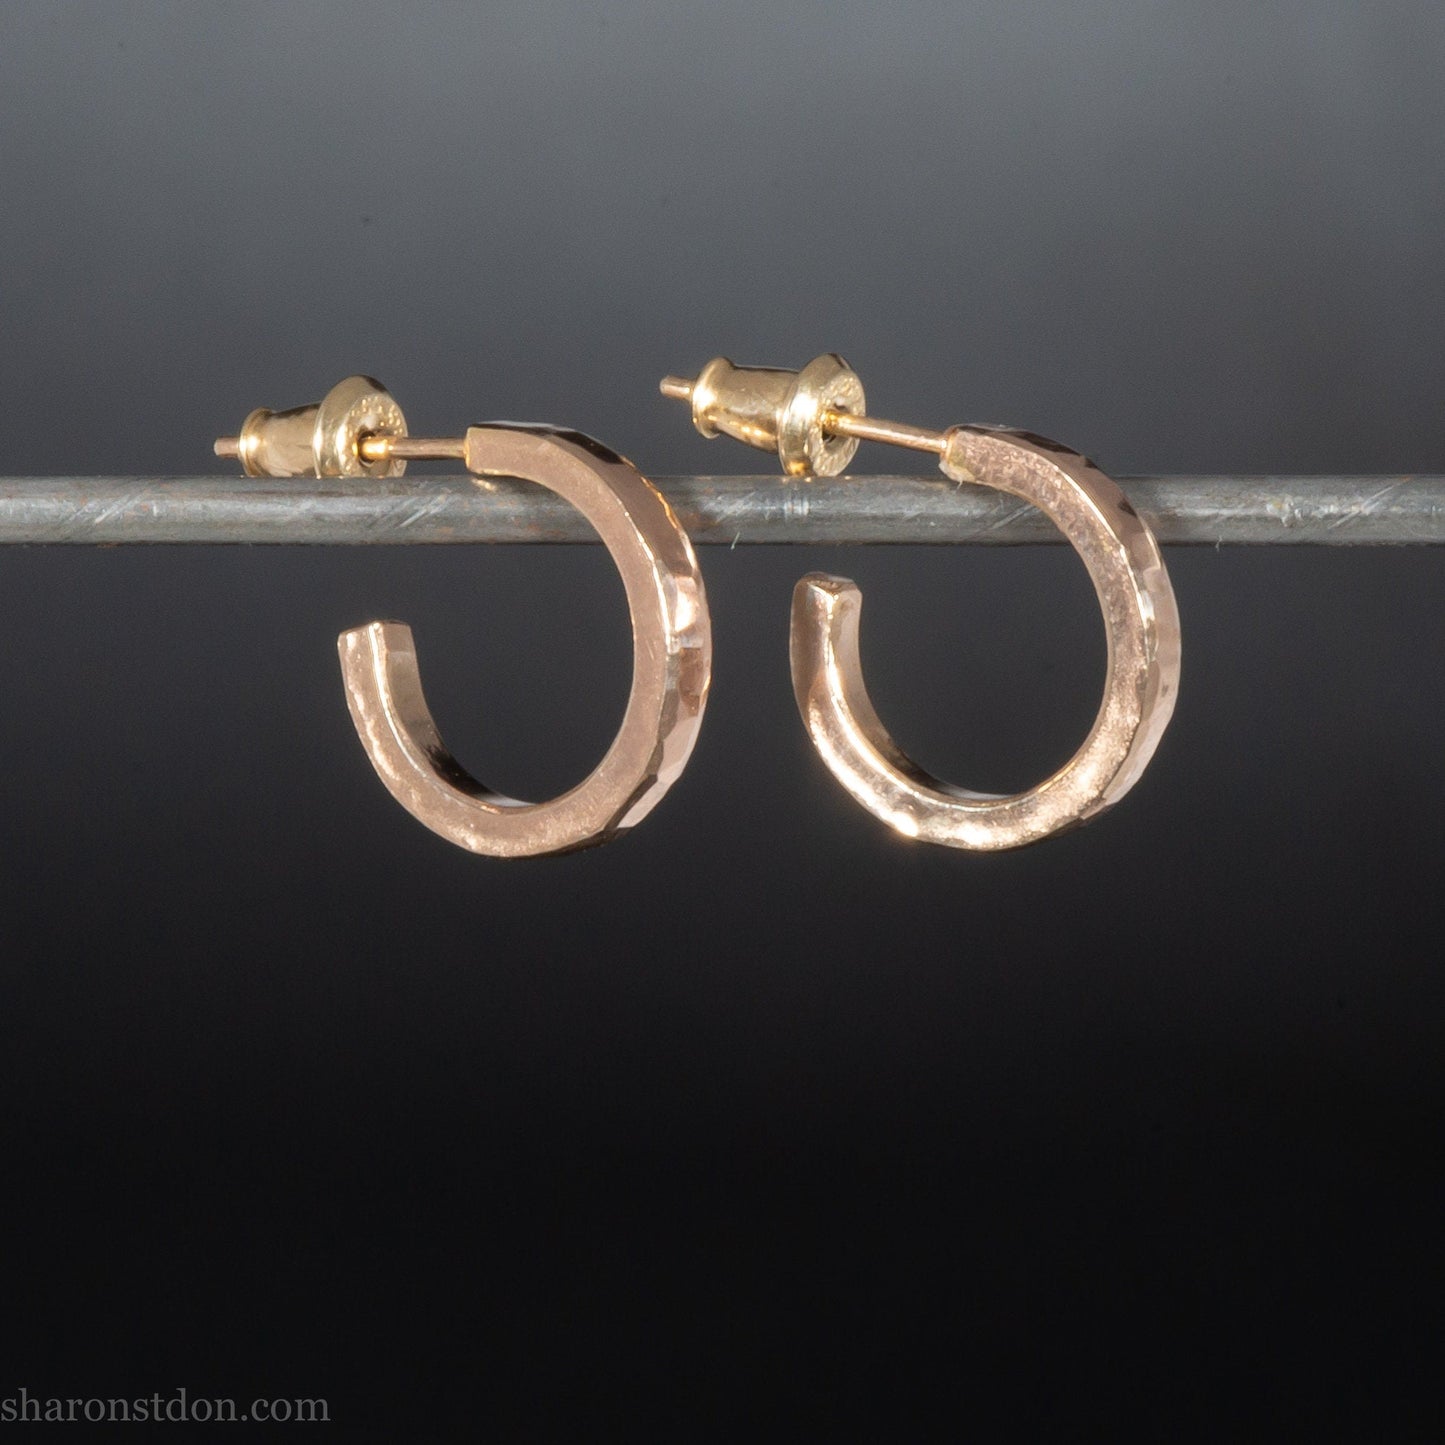 14mm x 2mm 18k gold hoop earrings for men with locking gold backs. Solid hammered yellow gold with brushed matte finish.